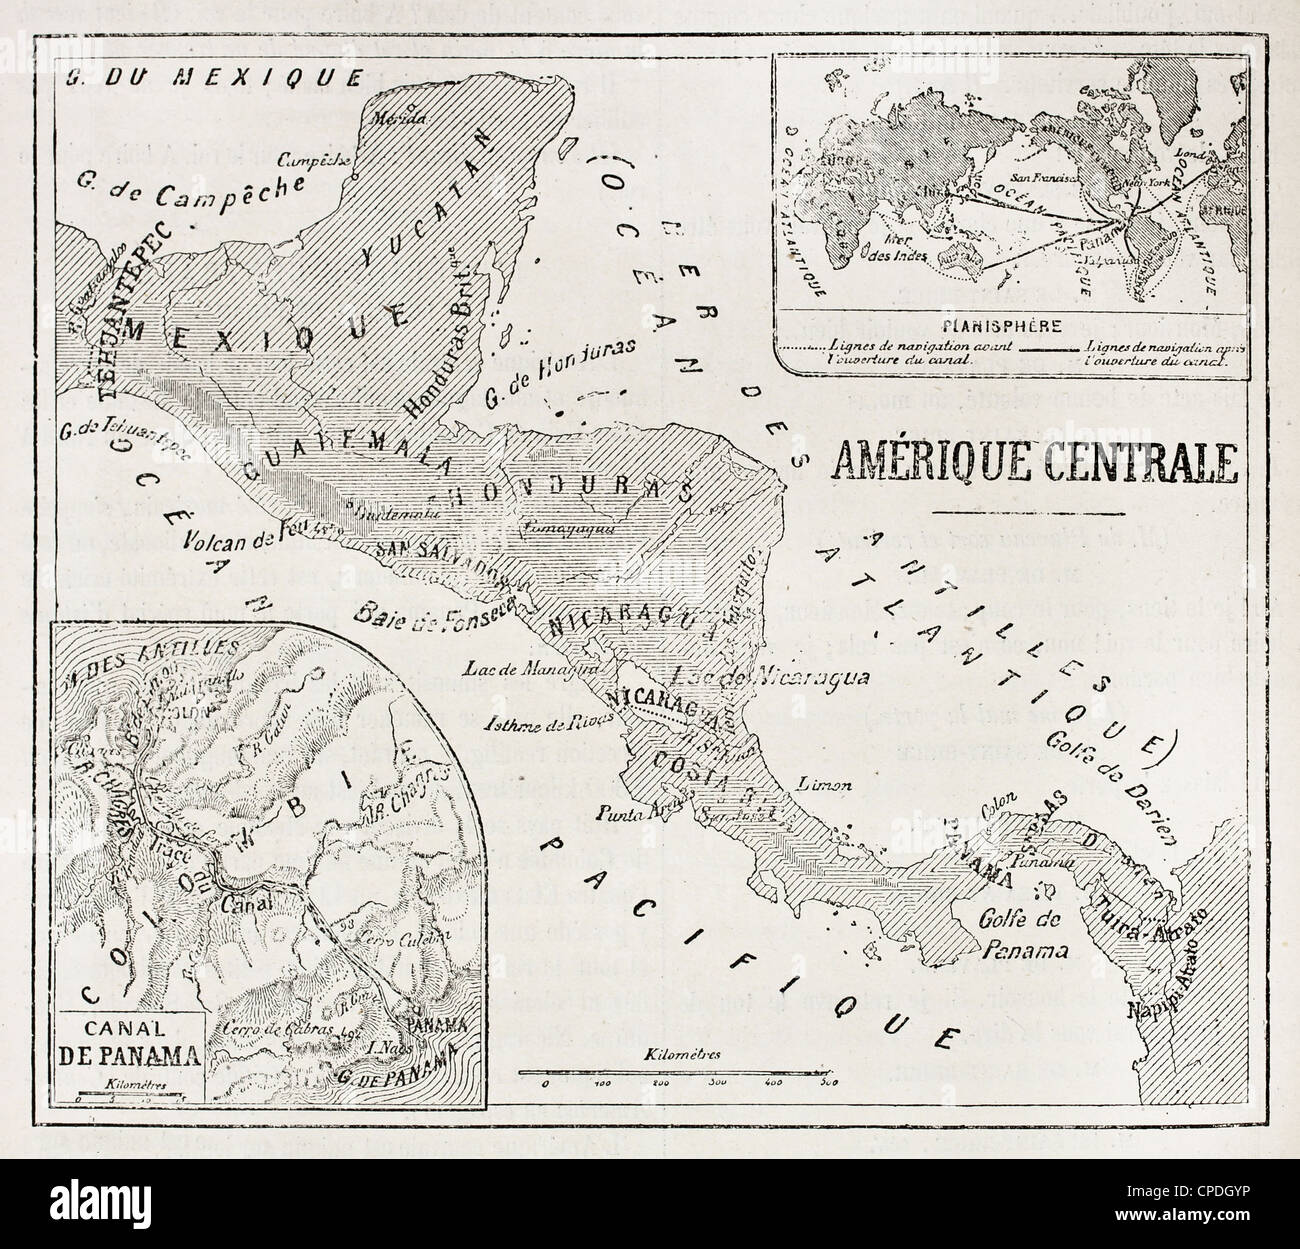 Central America old map with Panama and Planisphere insert maps Stock Photo